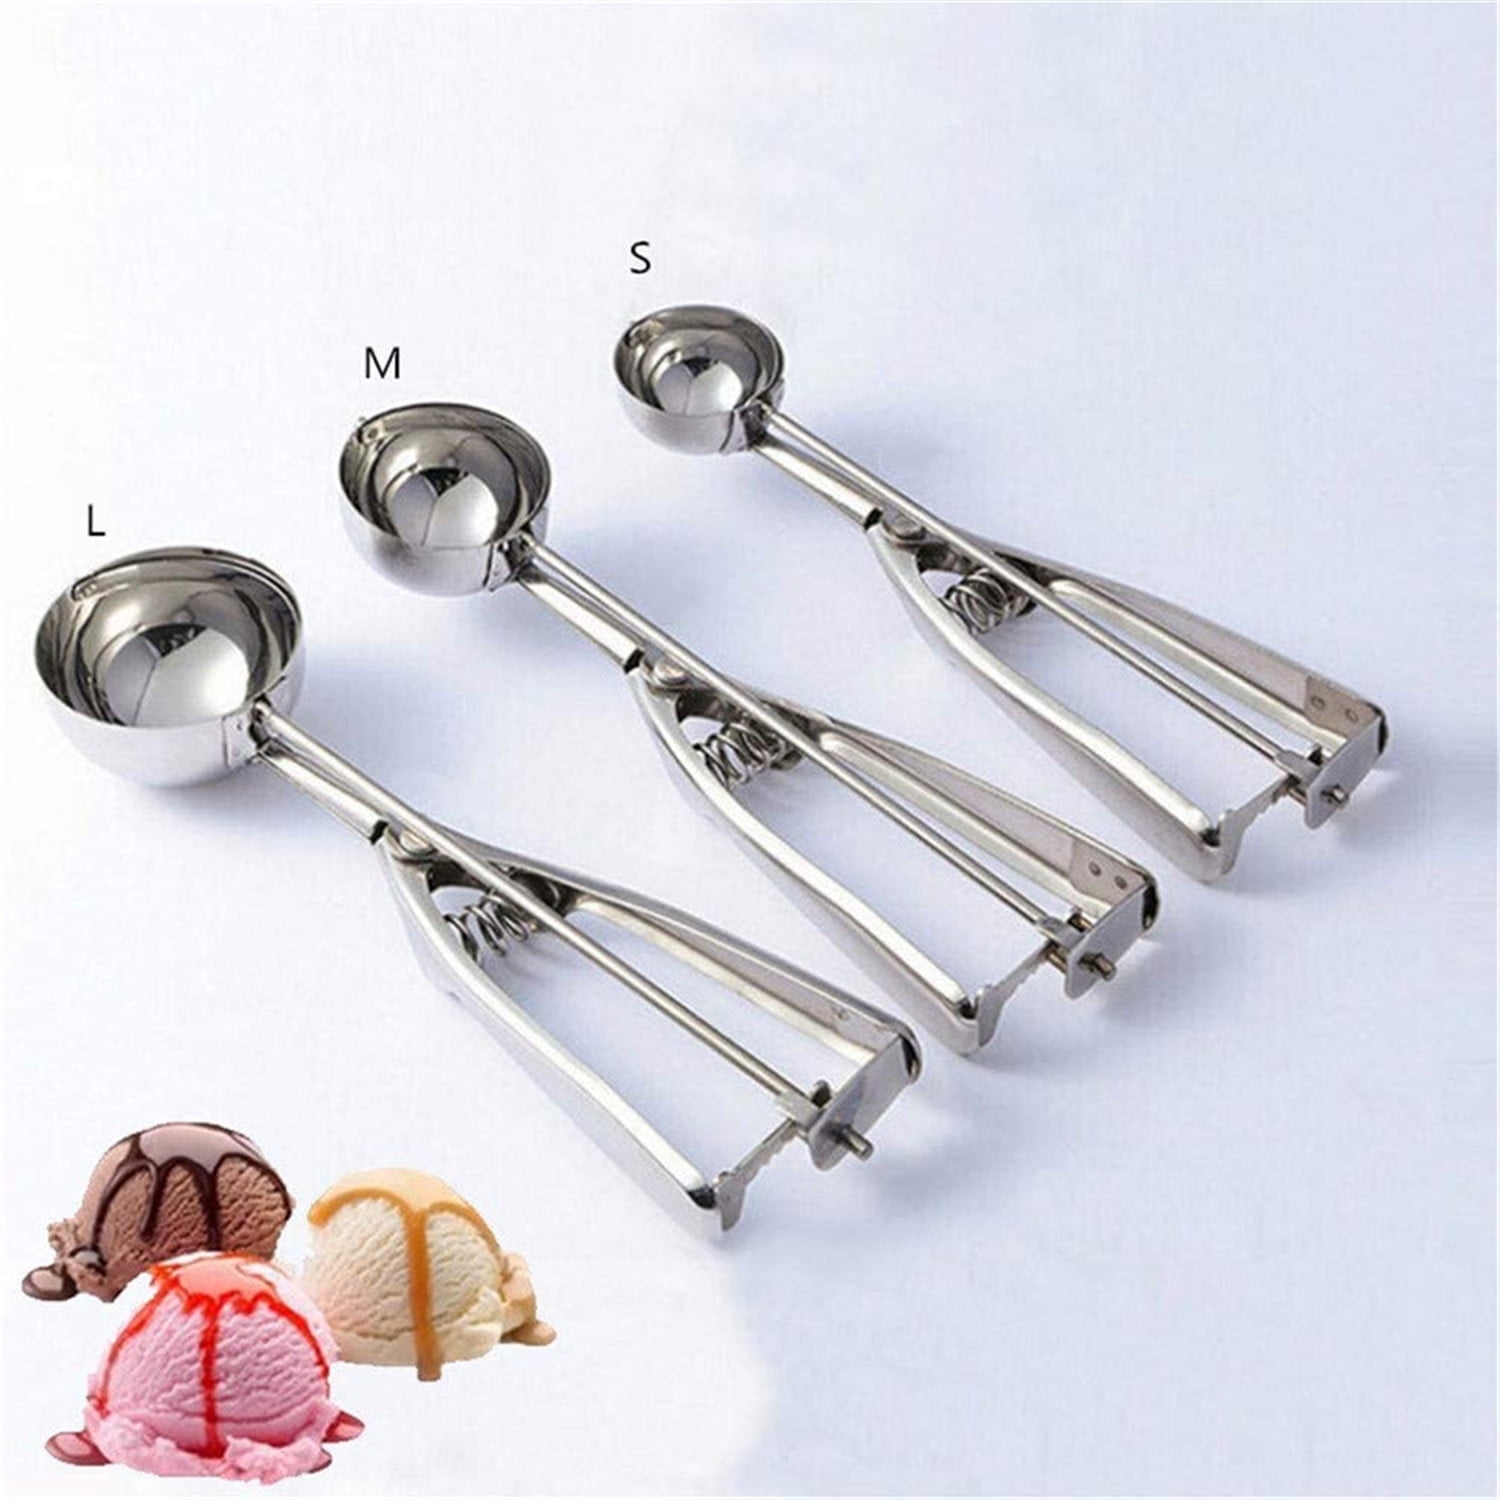 Set of 3,L//M//S Cupcake Include Scoops for Cookie Muffin Meatball Ice Cream Cookie Ice Cream Scoop Set 3 Pcs Stainless Steel Melon Baking Cookie Scooper with Trigger for Baking